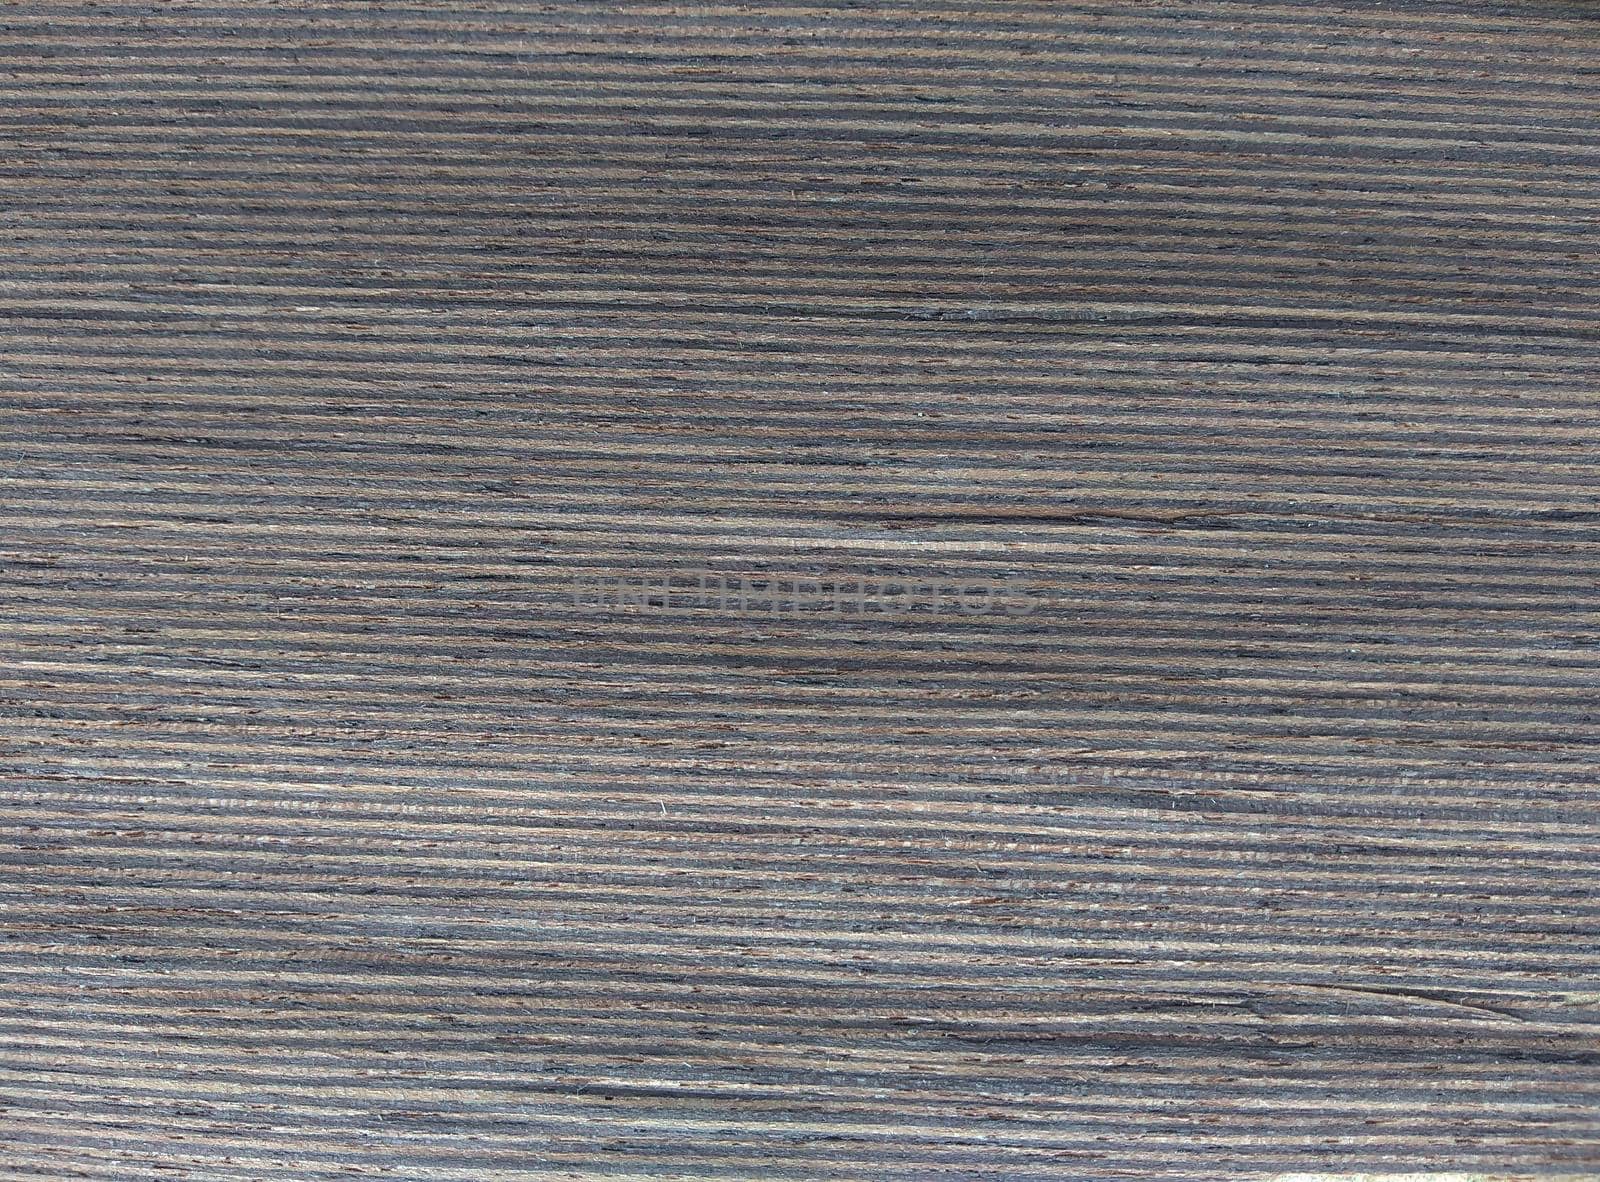 Natural wengen quarter wood texture background. veneer surface for interior and exterior manufacturers use.